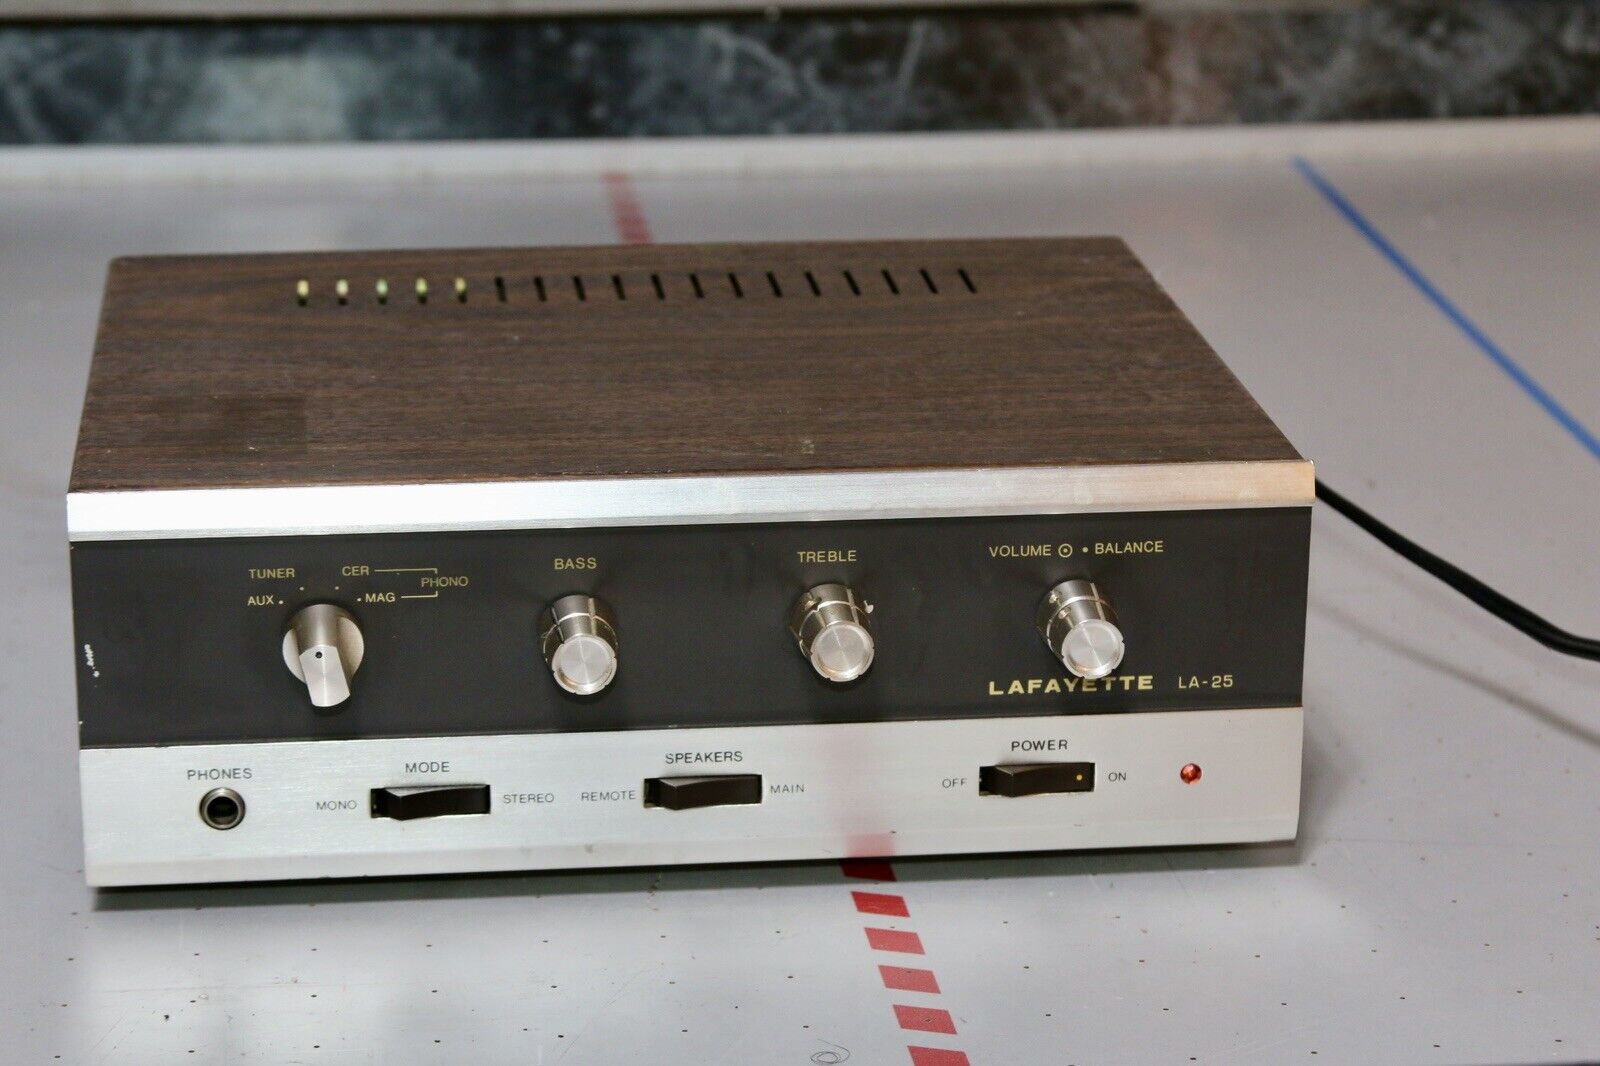 Vintage Lafayette LA-25 Stereo amplifier with phono (CER/MAG) input